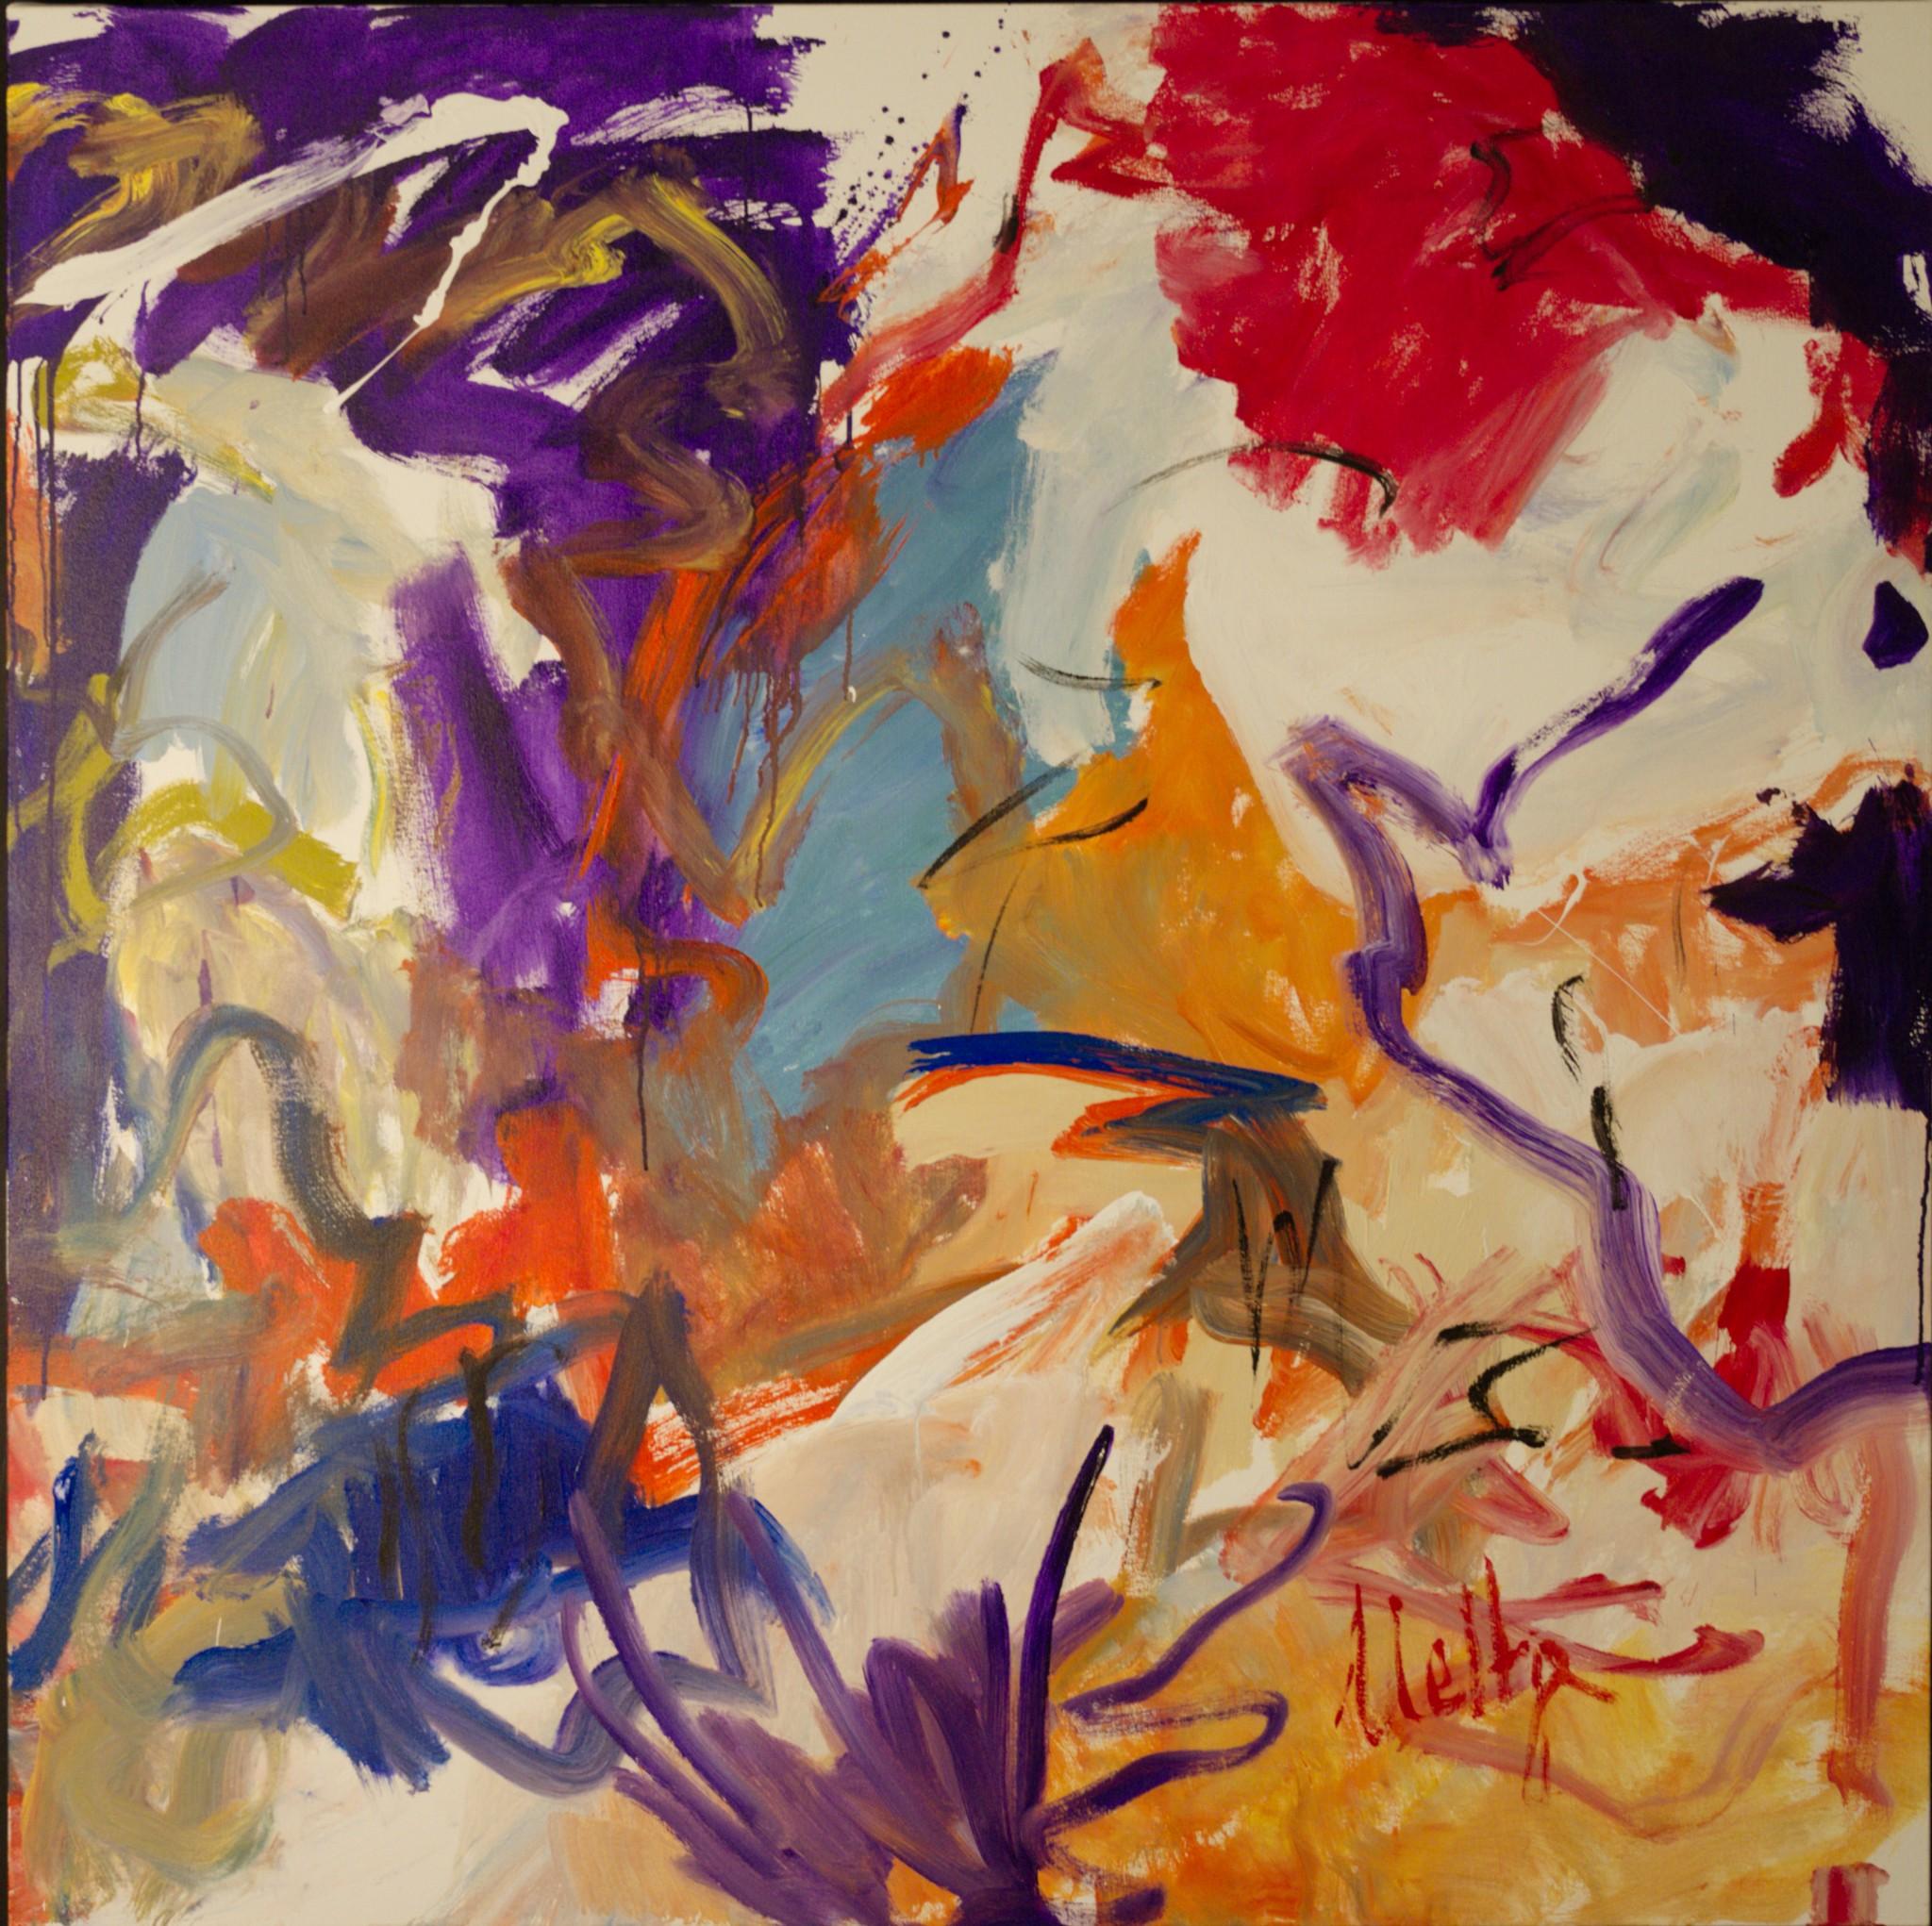 Neltje Abstract Painting - Scent of Summer-Purple Cream and Red 60 X 60